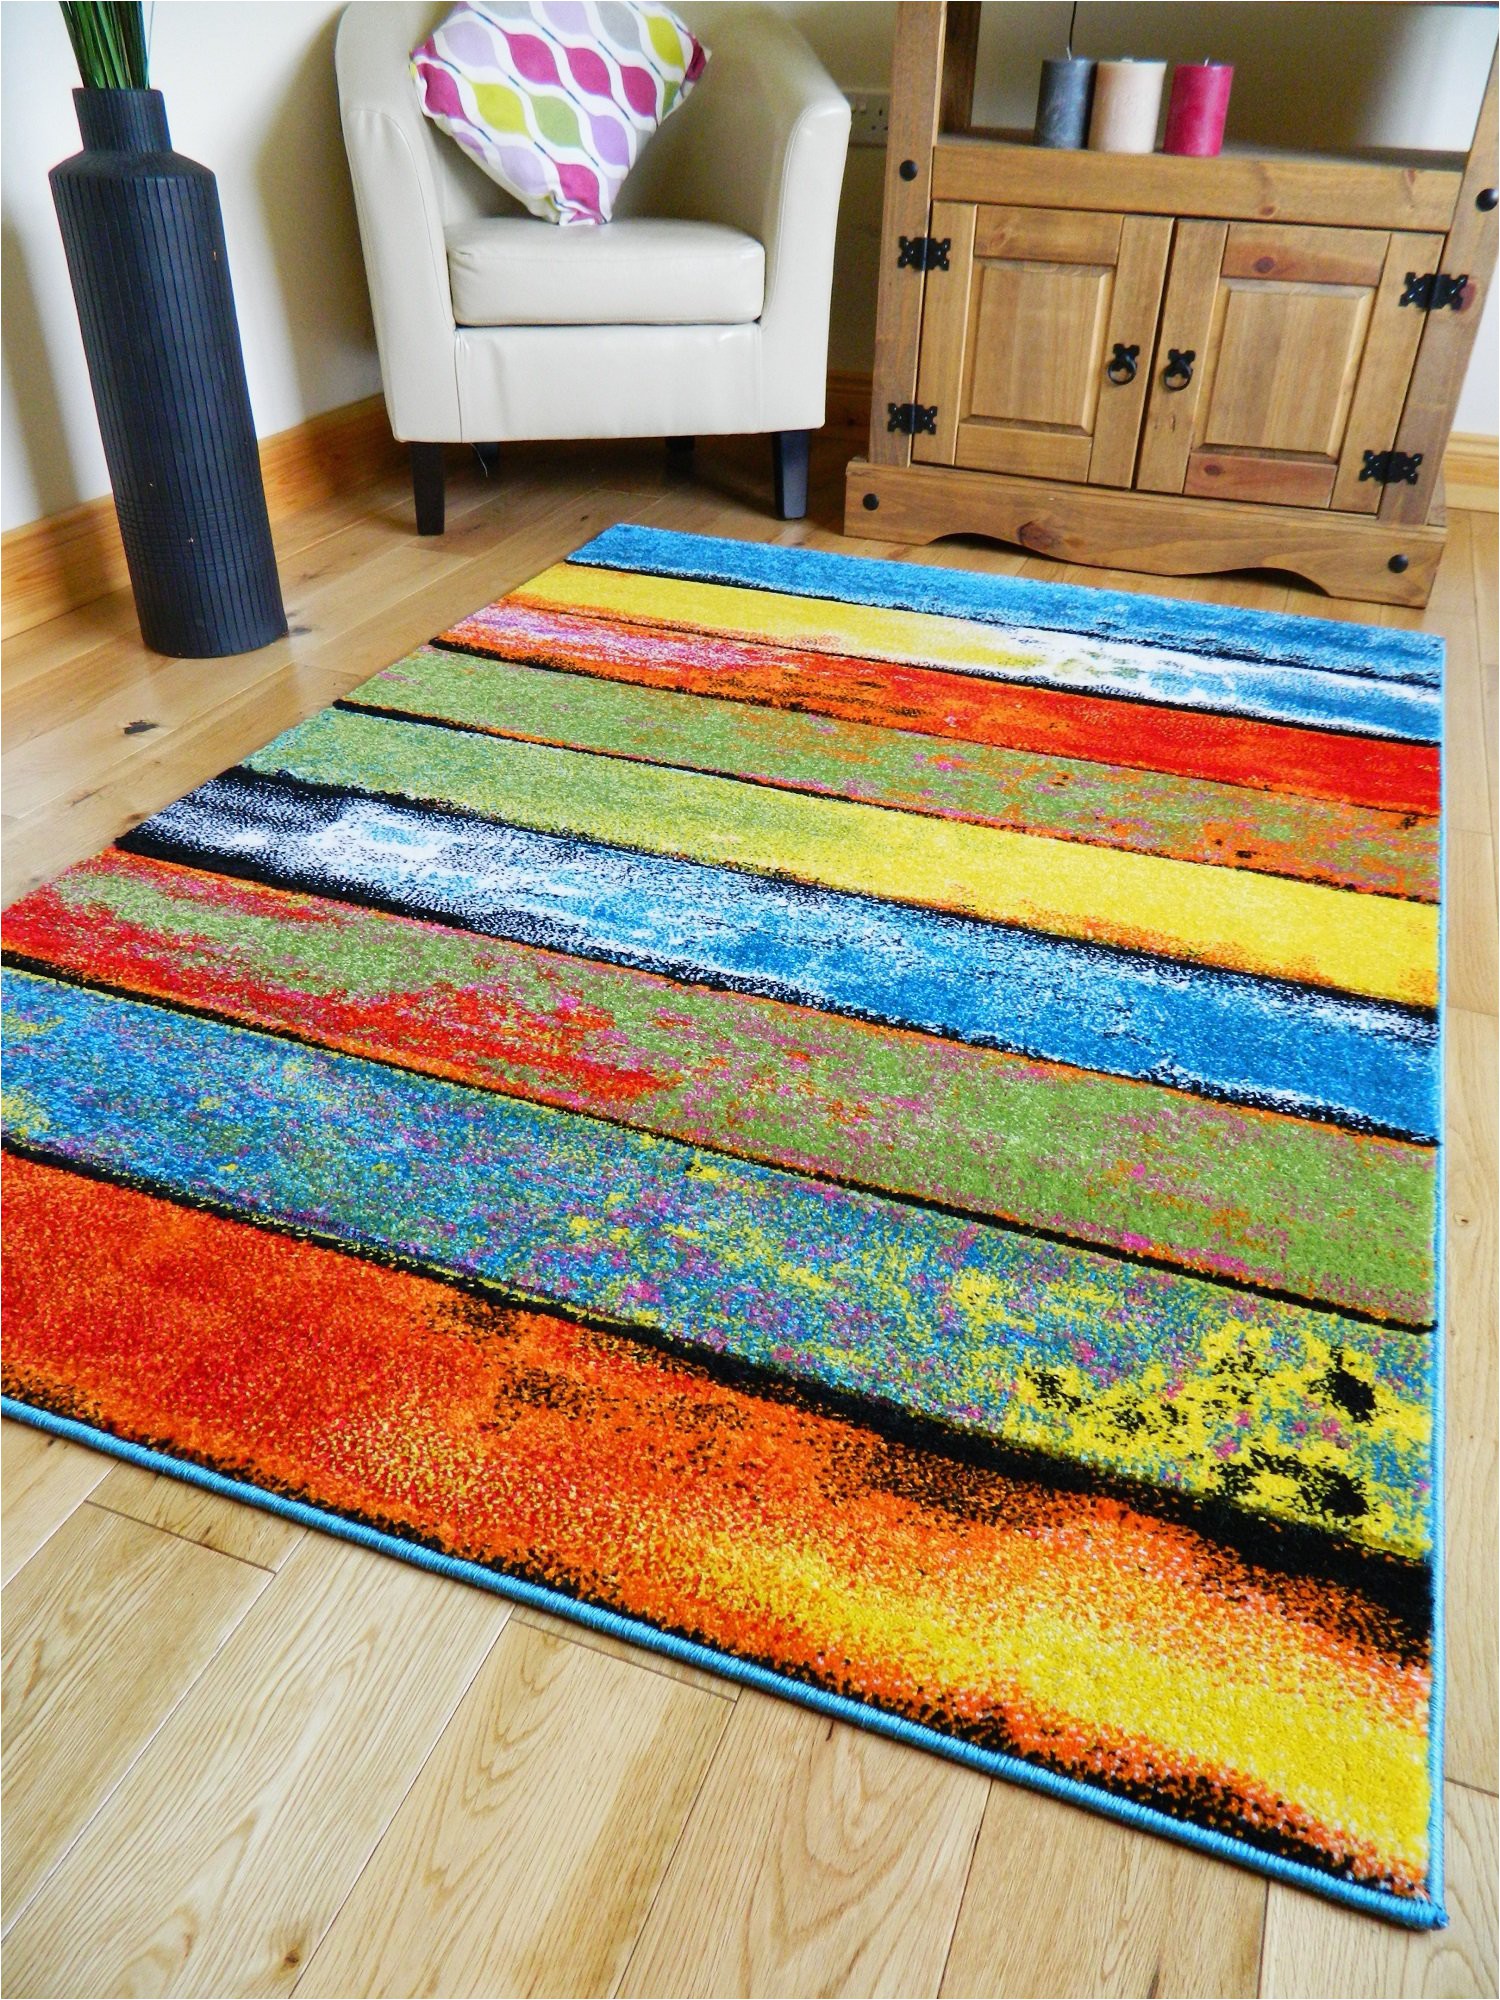 Large Thick soft area Rugs Multi Coloured Stripe Funky Bright Modern Thick soft Heavy Quality area Rug Small Medium Xx Large Rug New Modern soft Navy Yellow Blue Red Carpet Non